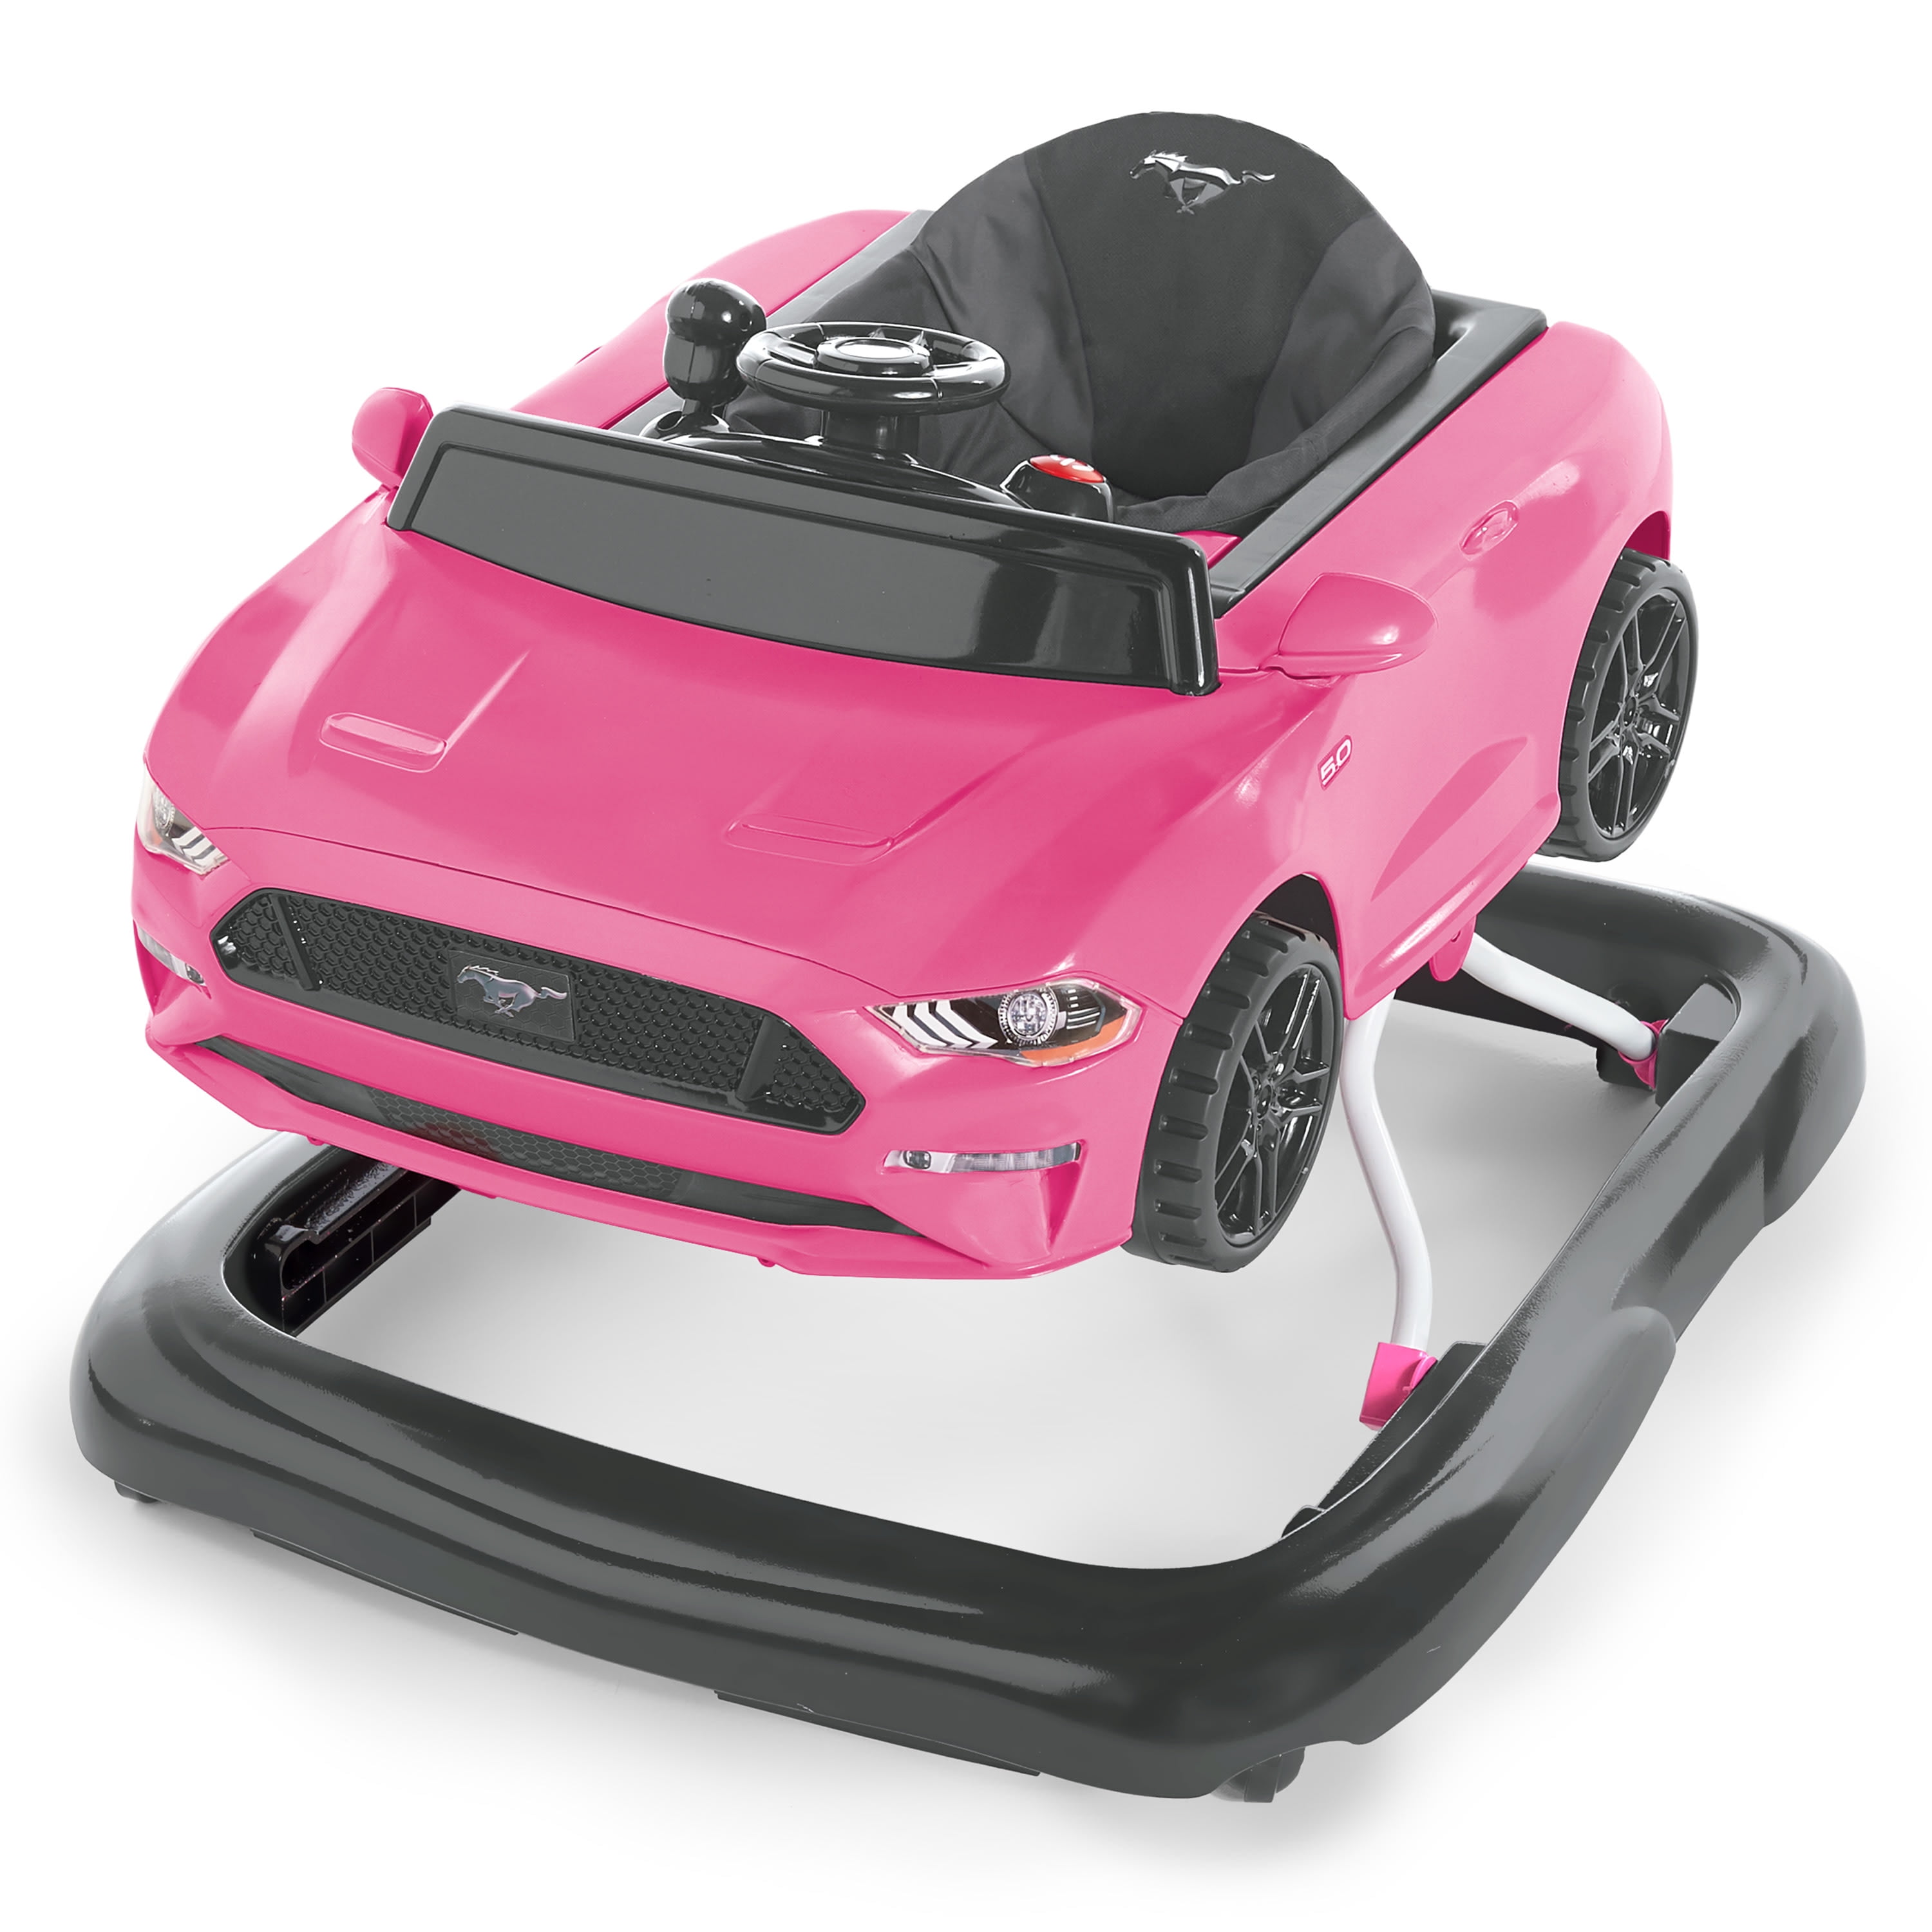 Steering Toy, Baby Push Activity Ford Pink Removable Mustang & with Wheel Unisex Center Infant, Walker 4-in-1